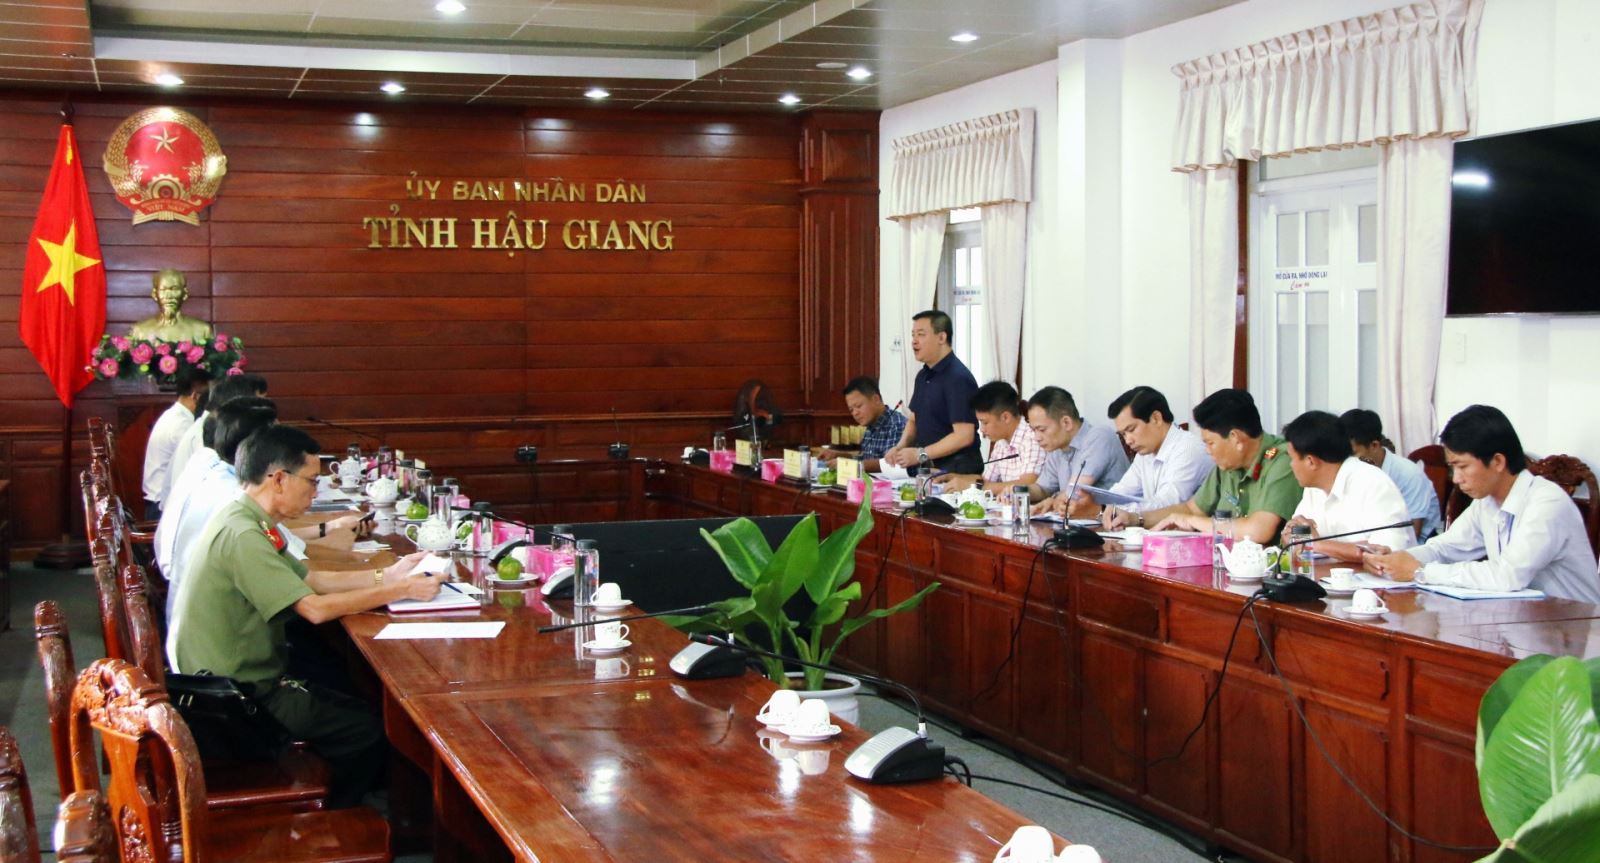 217 foreign NGOs’ projects implemented in Hau Giang